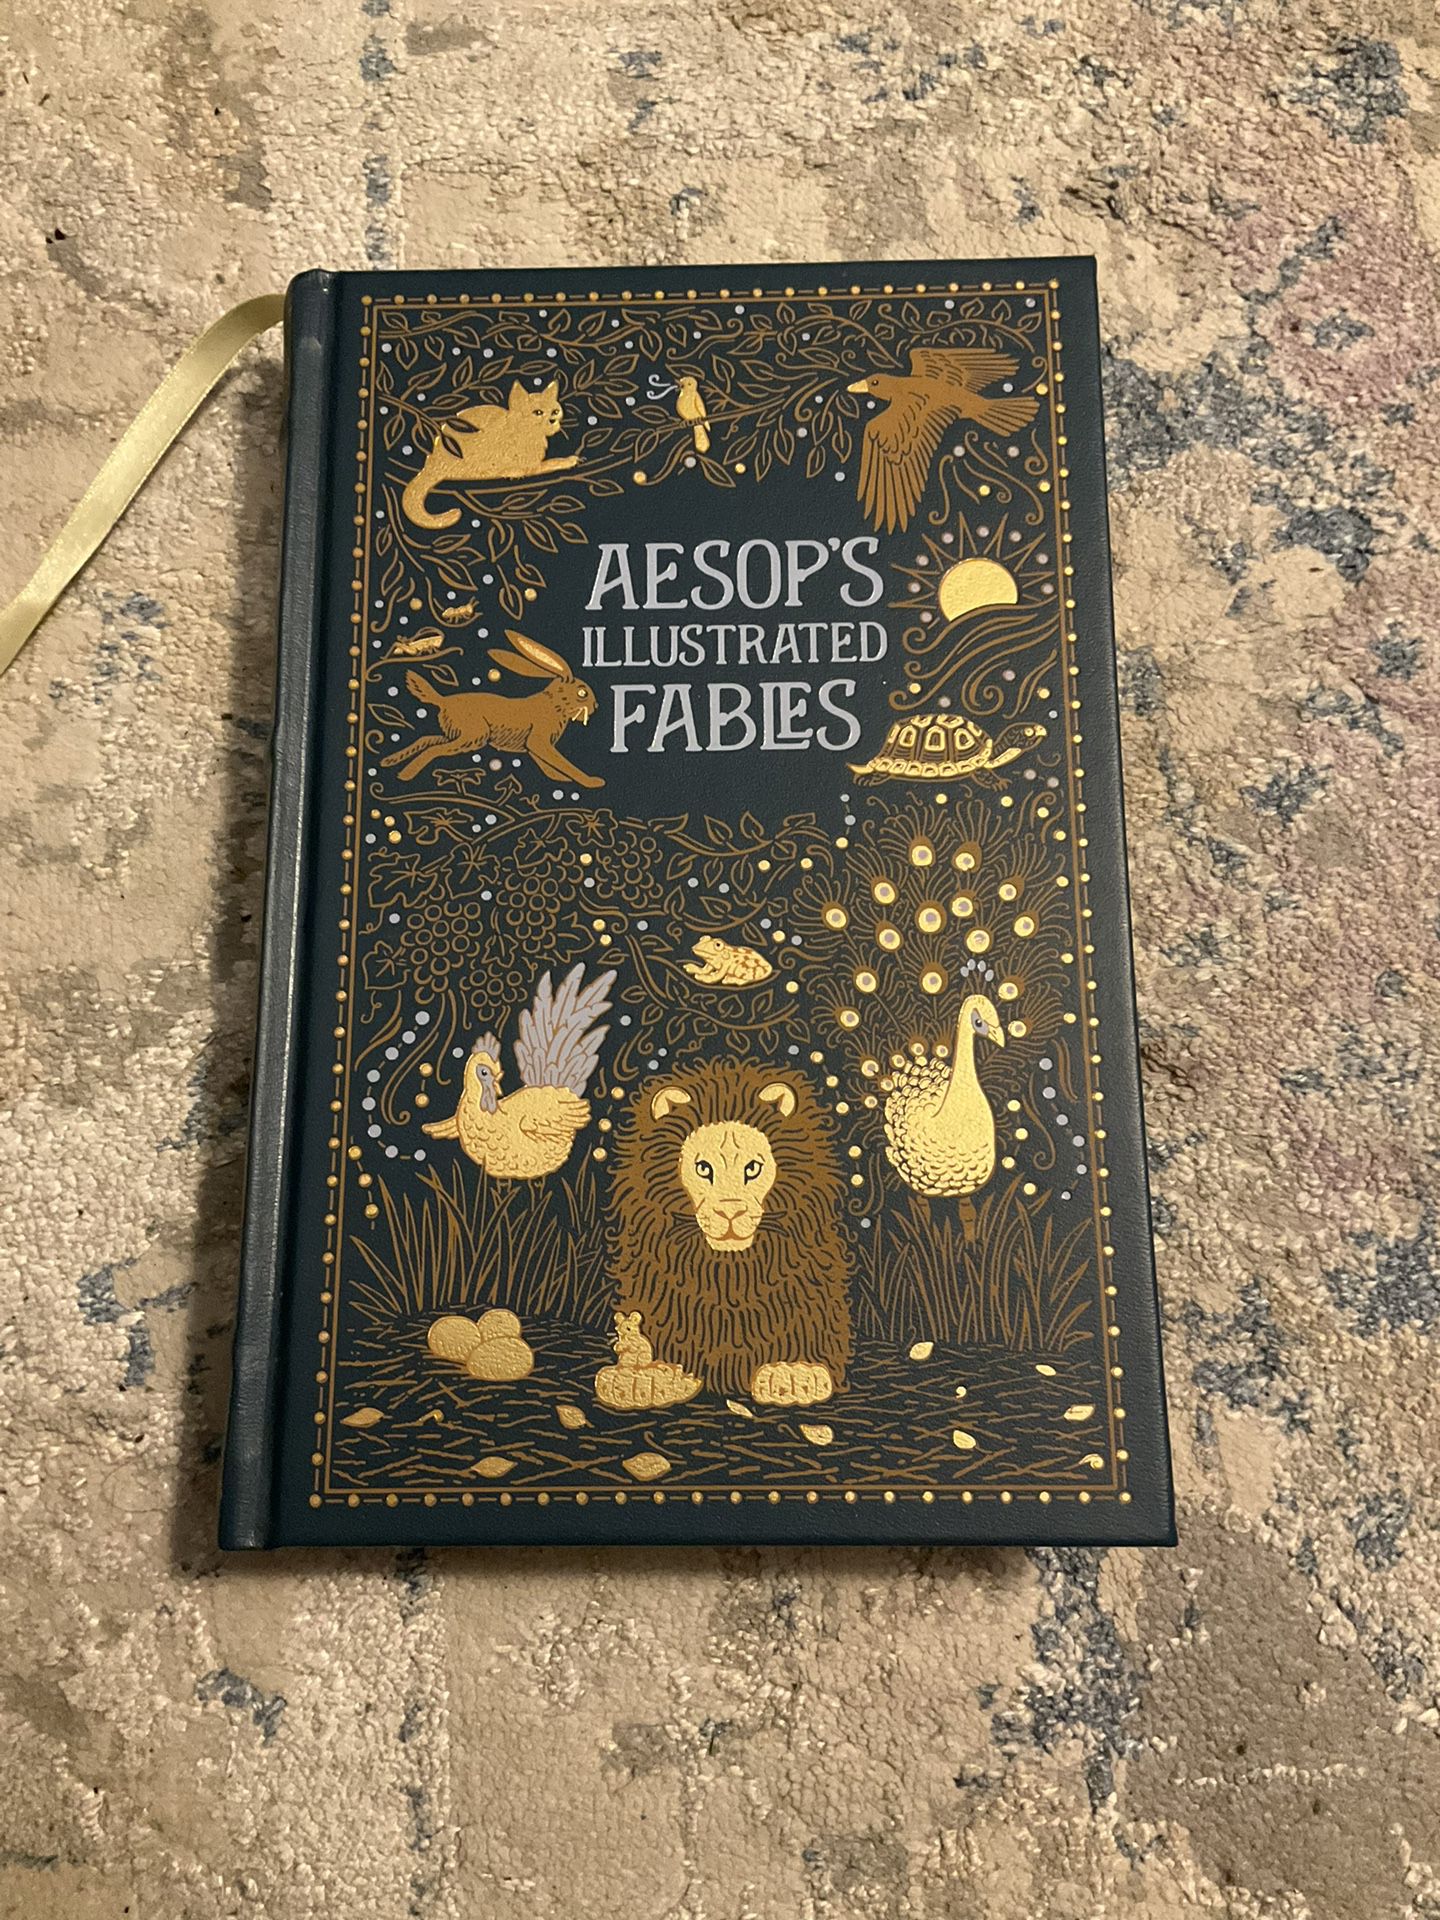 Aesop’s Illustrated Fables